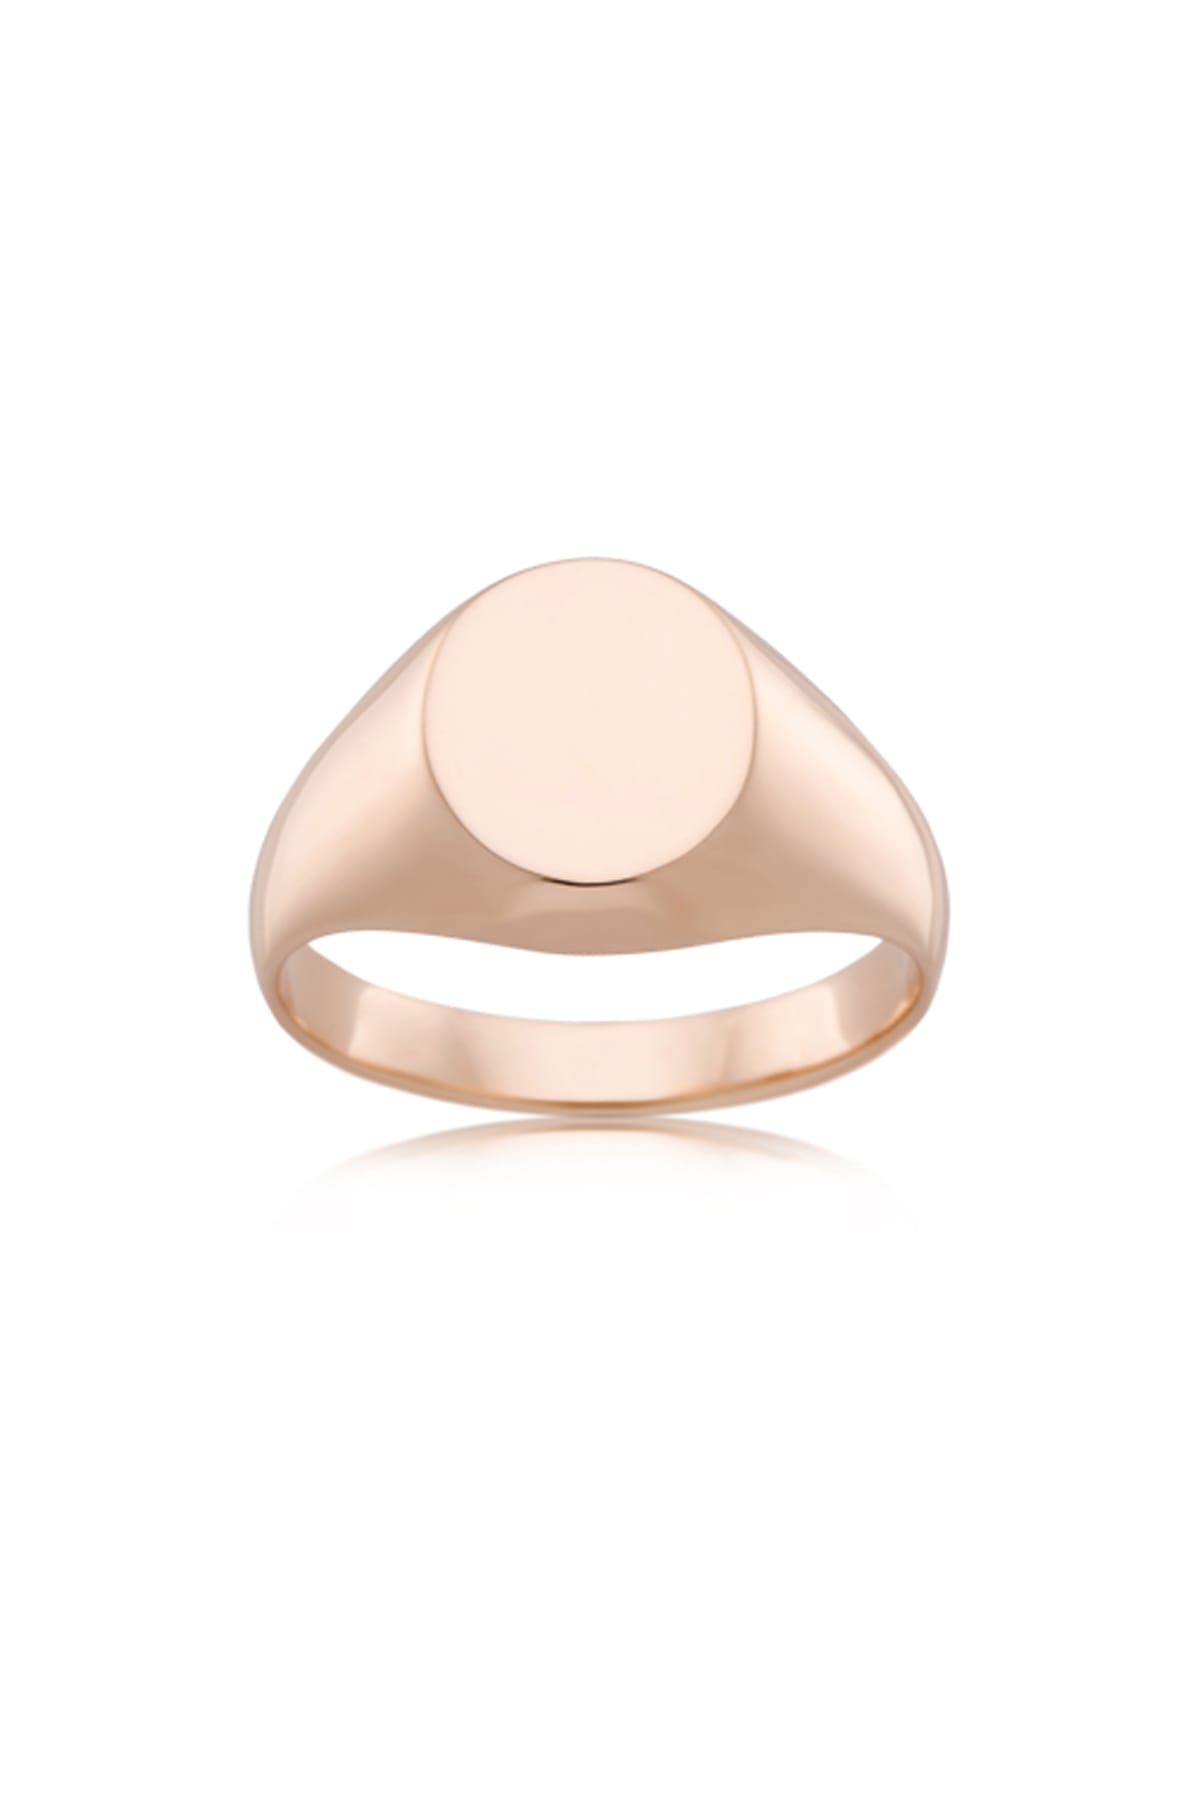 Solid Oval Flat Top Signet Ring with Plain Smooth Sides available at LeGassick Diamonds and Jewellery Gold Coast, Australia.